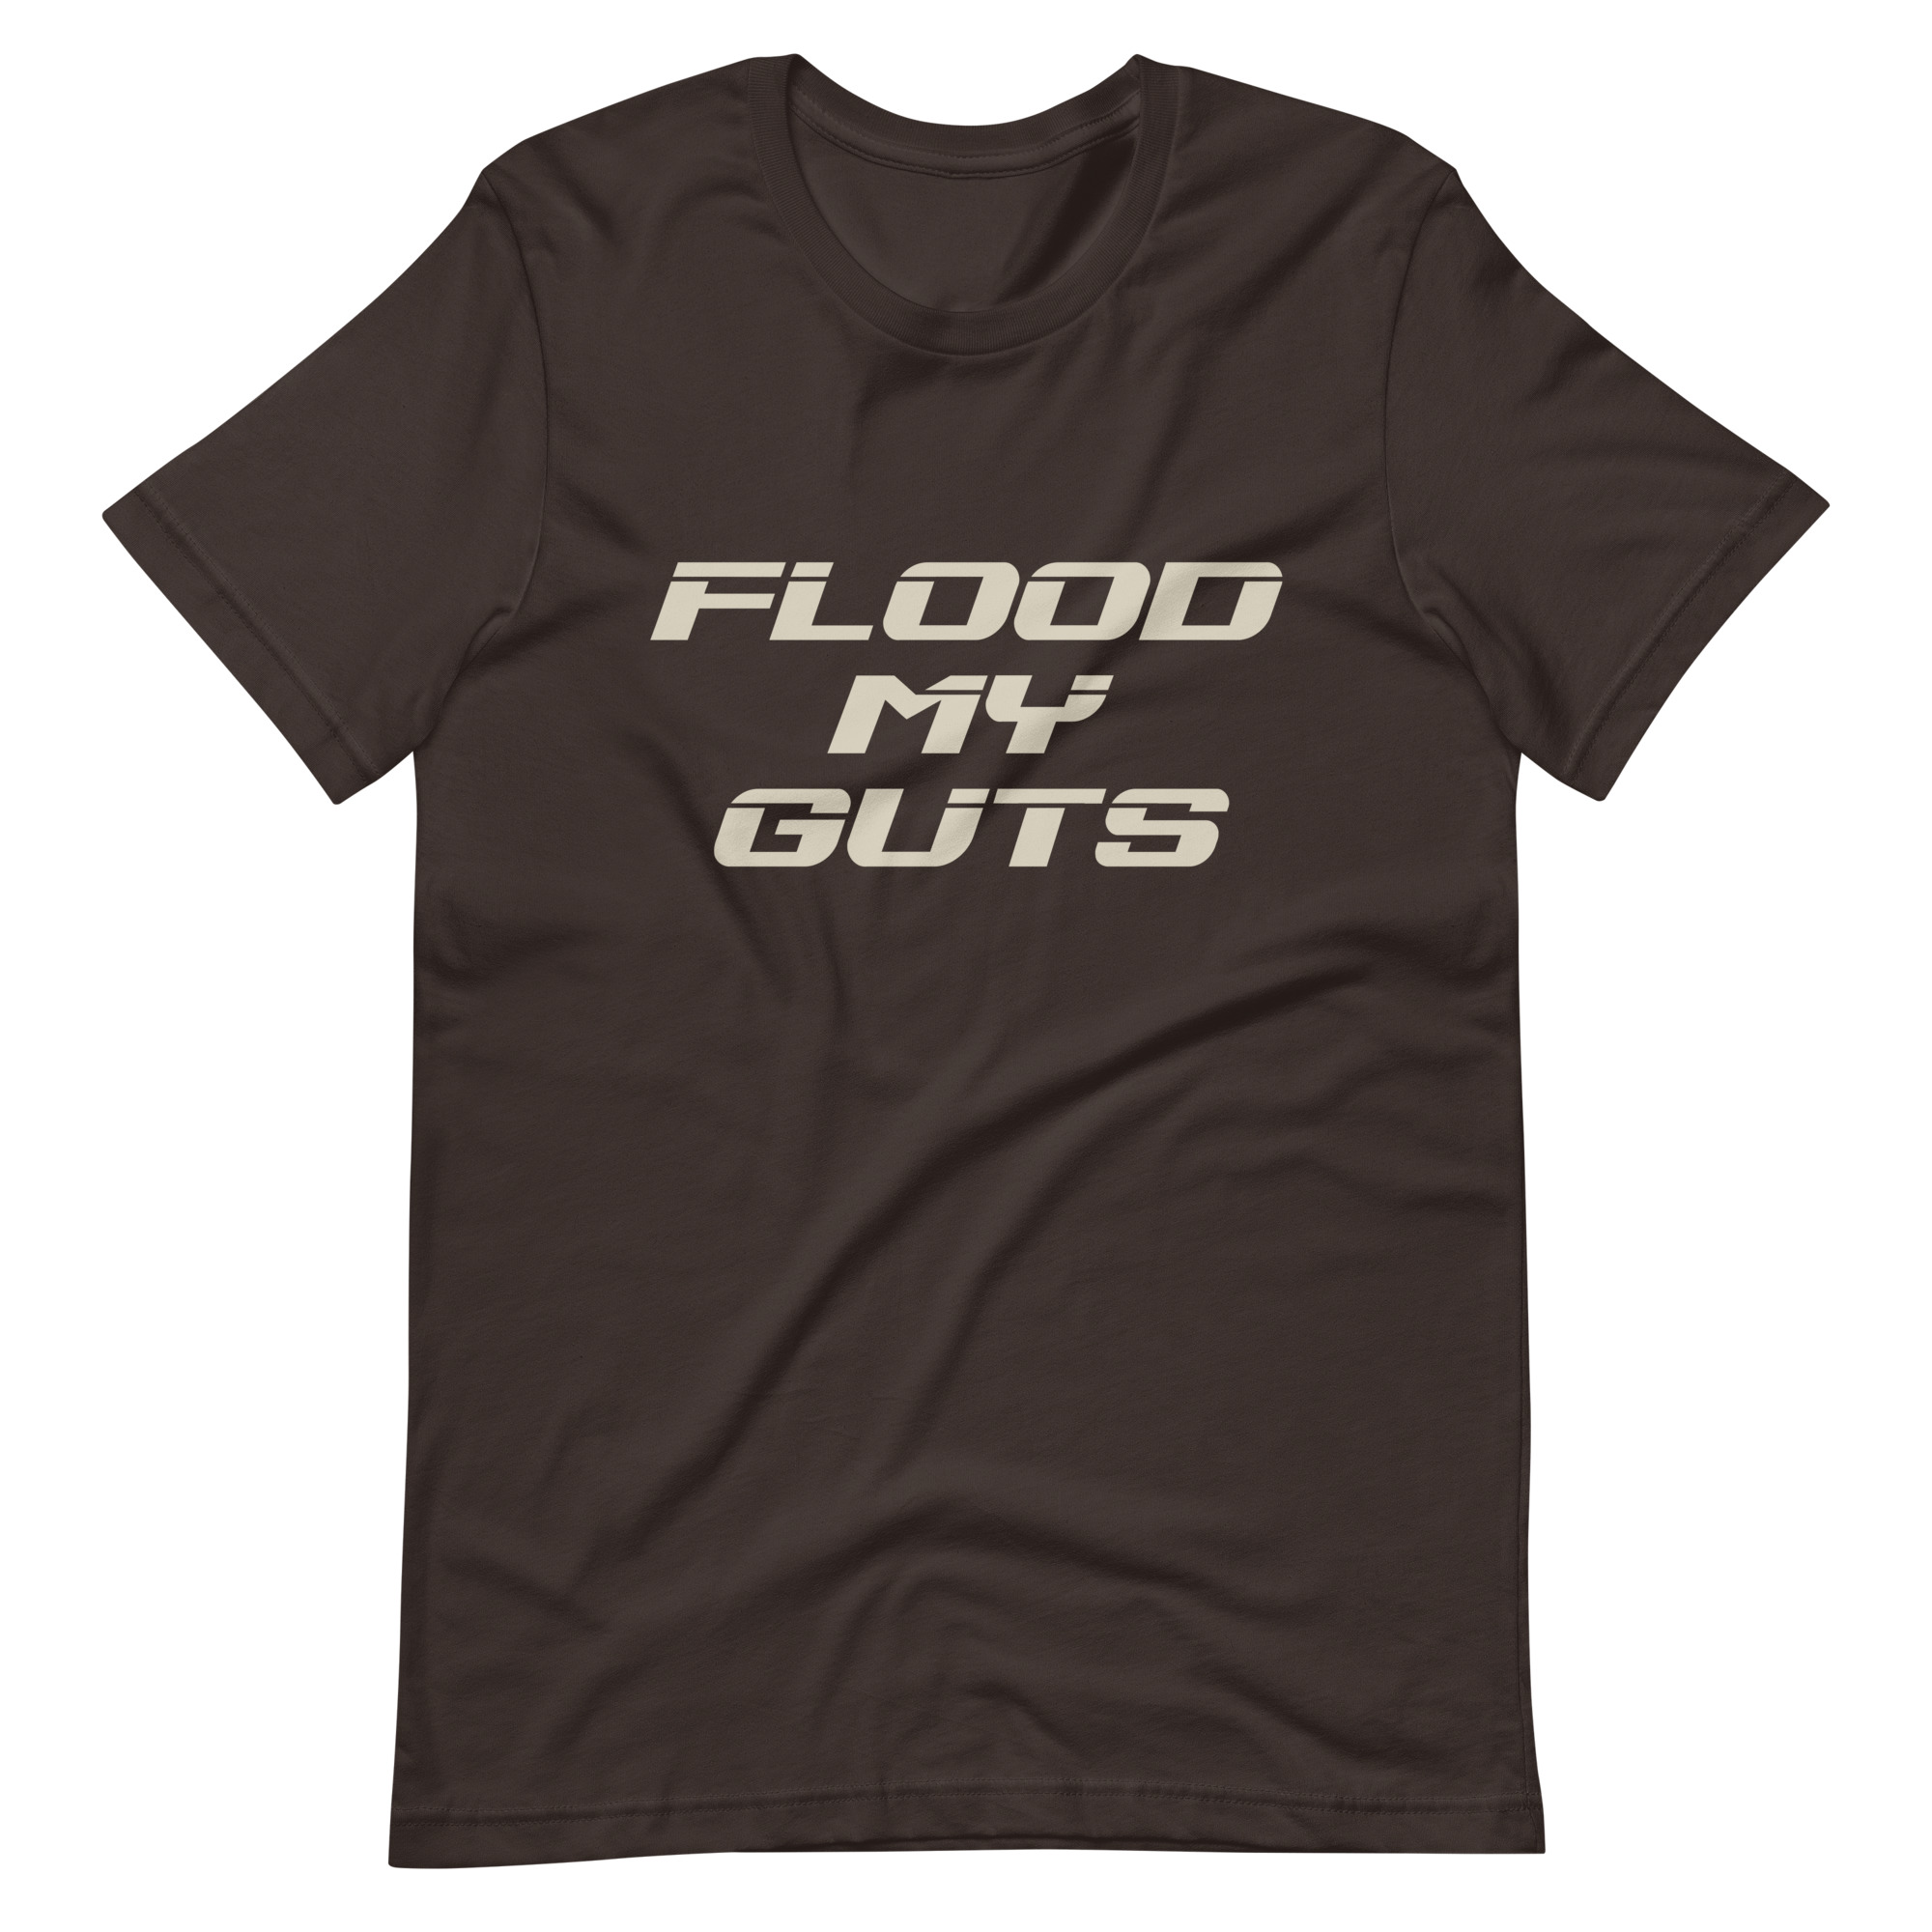 Featured image for “Flood my guts - Unisex t-shirt”